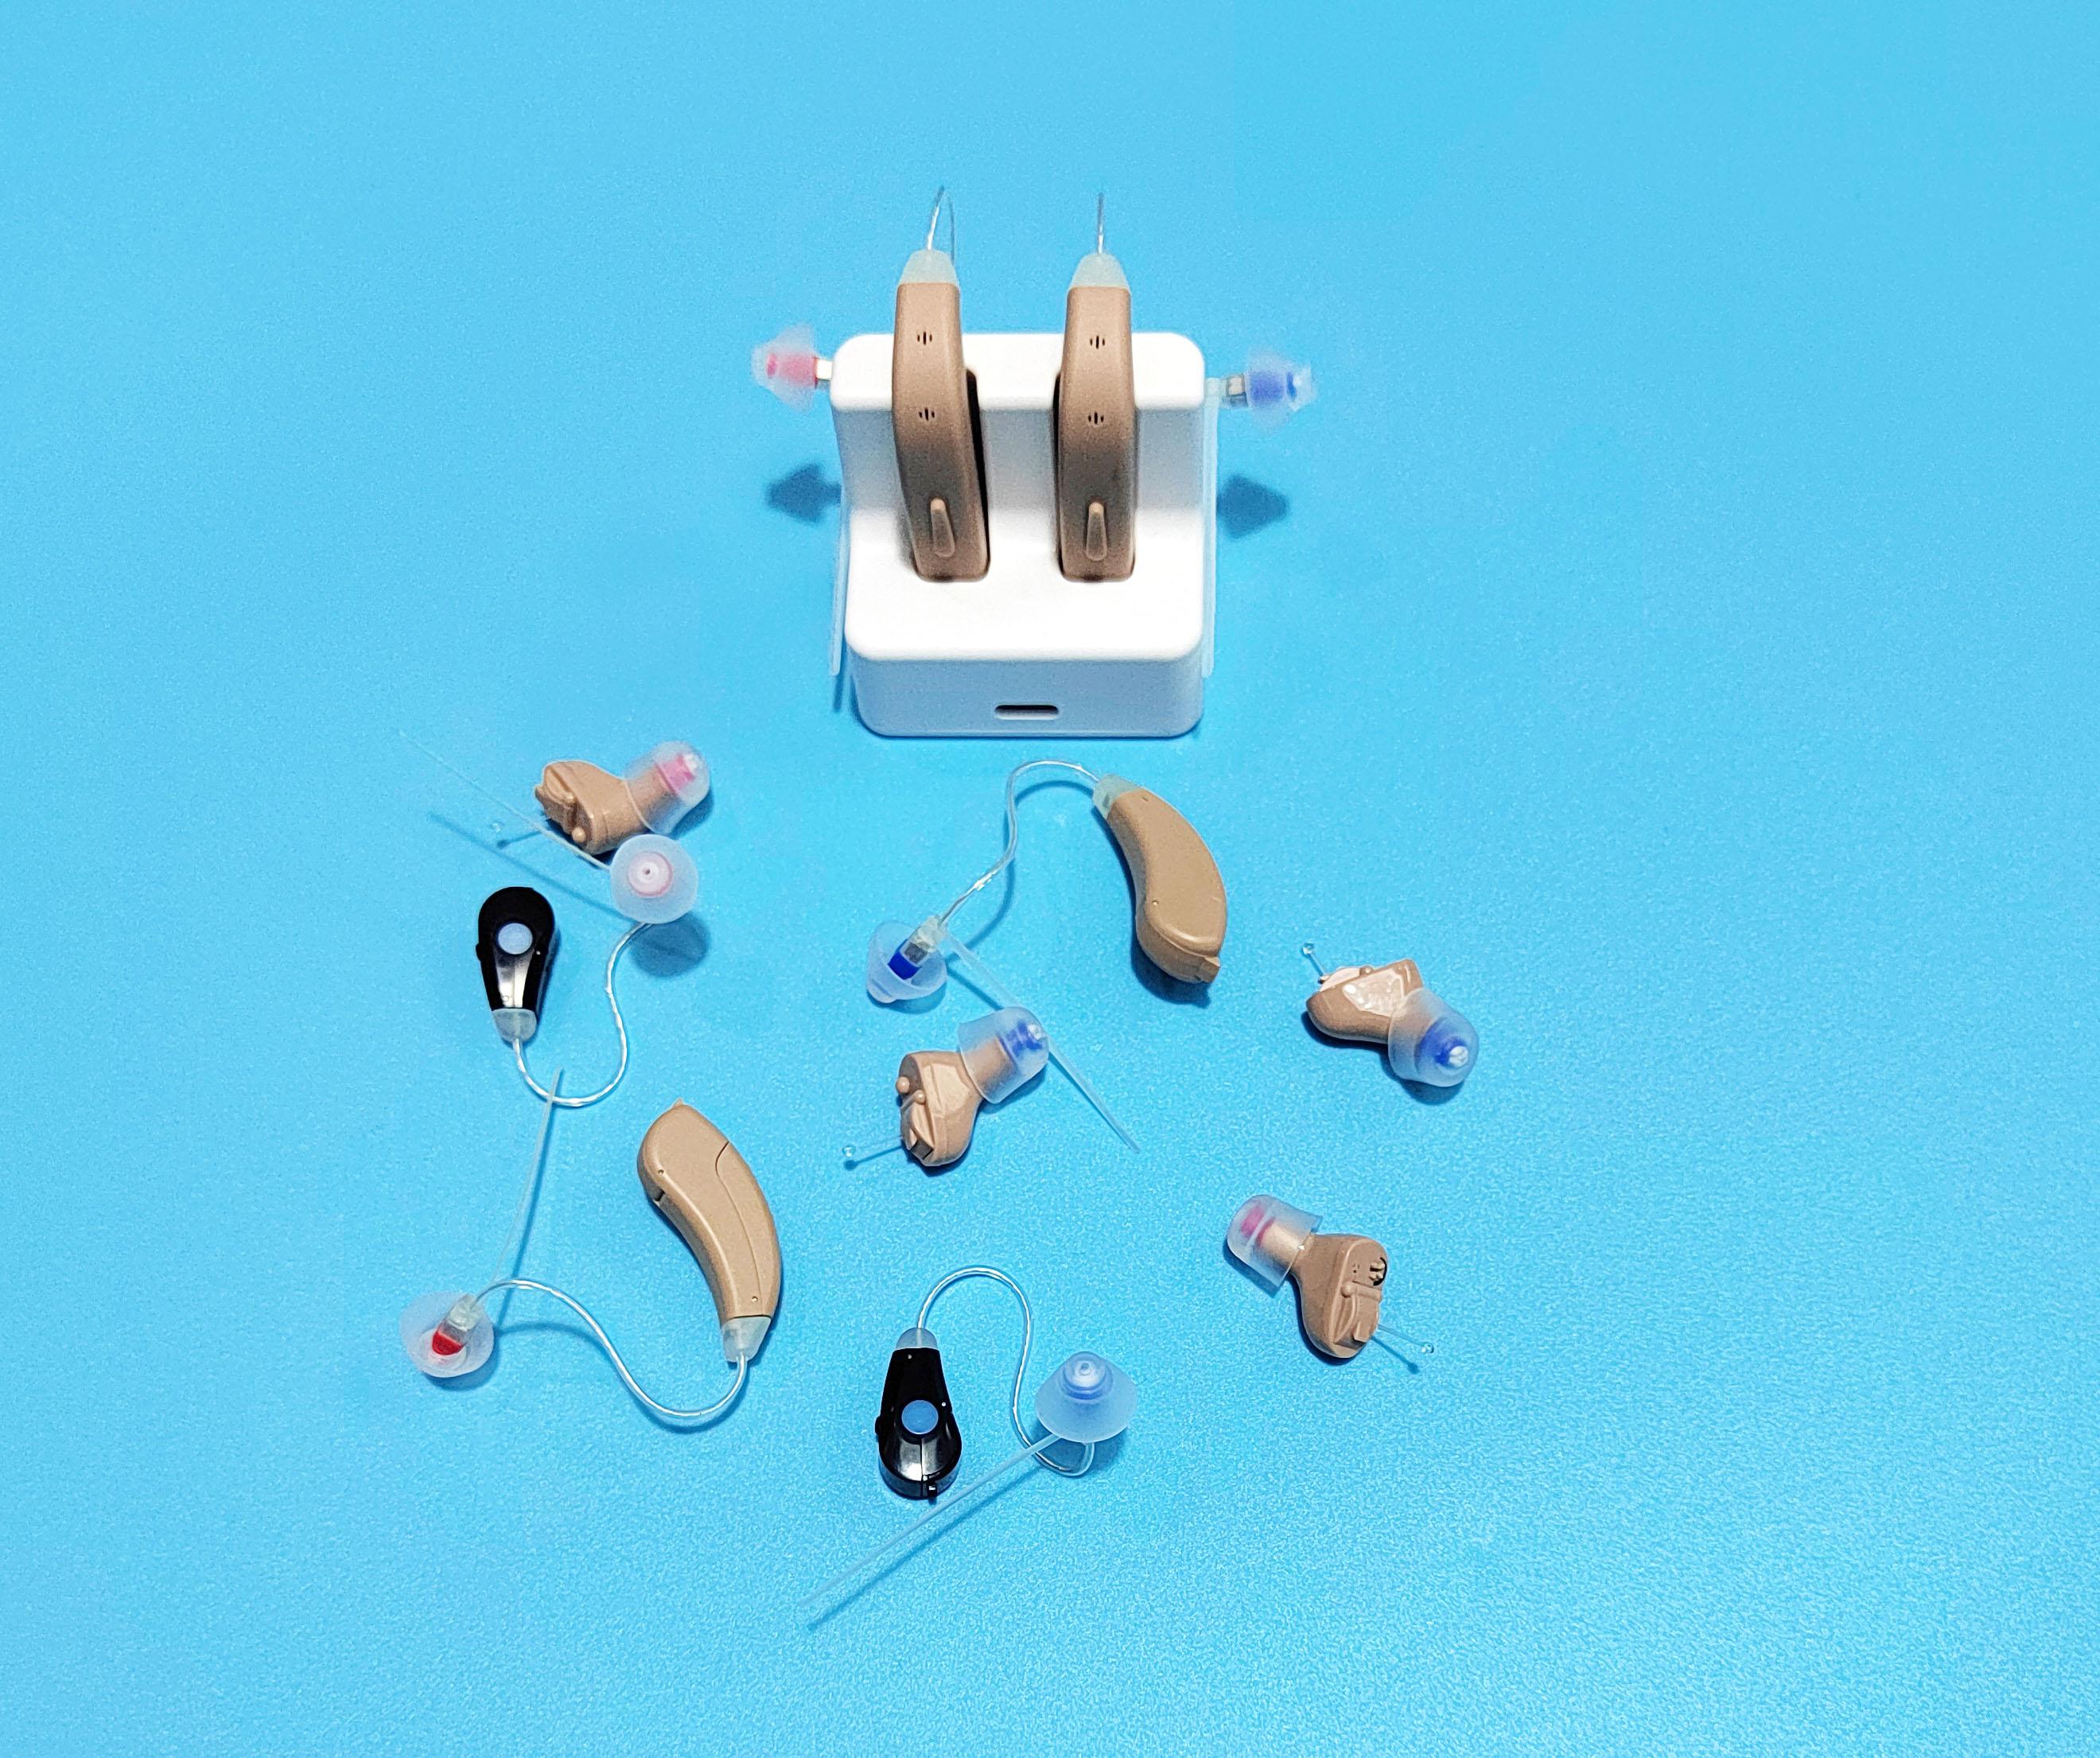 CHOOSING THE RIGHT CIC HEARING AID